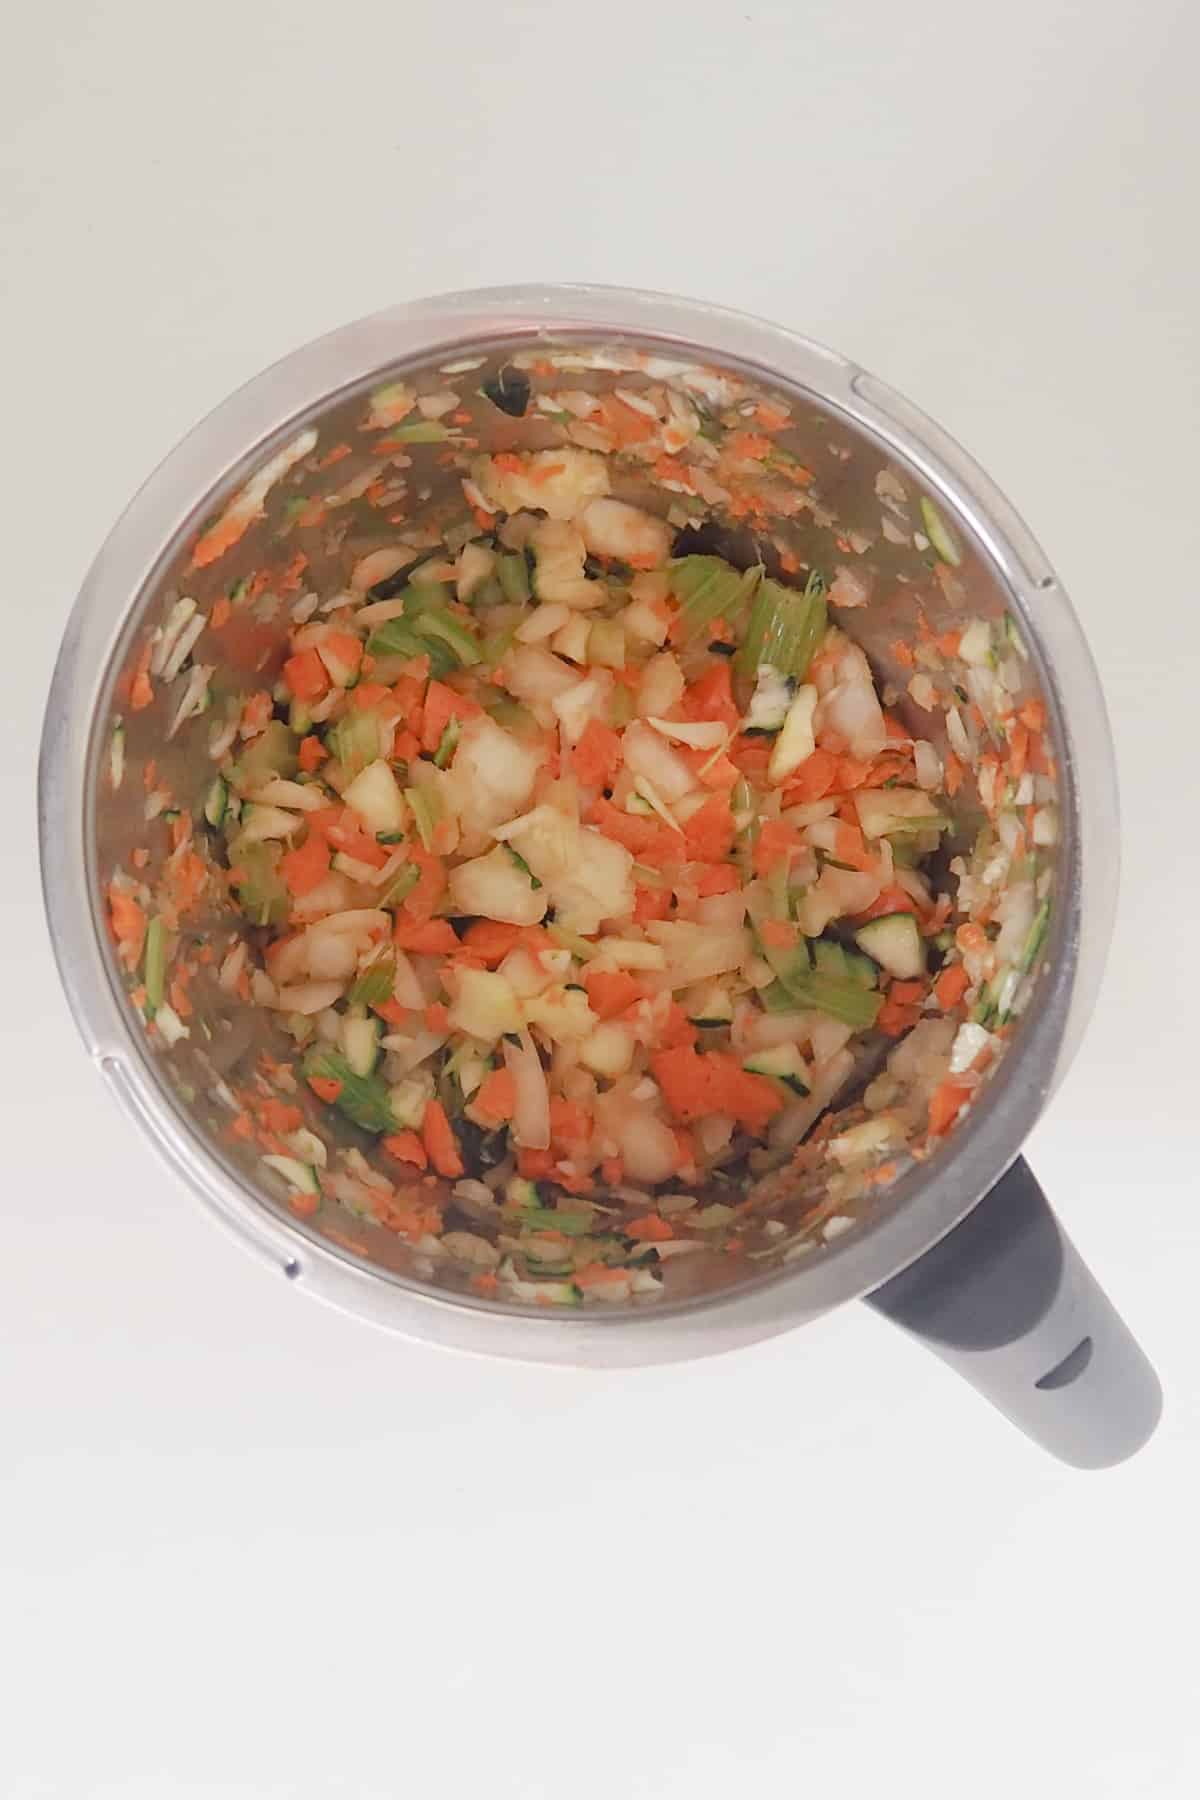 Chopped vegetables in a thermomix bowl.